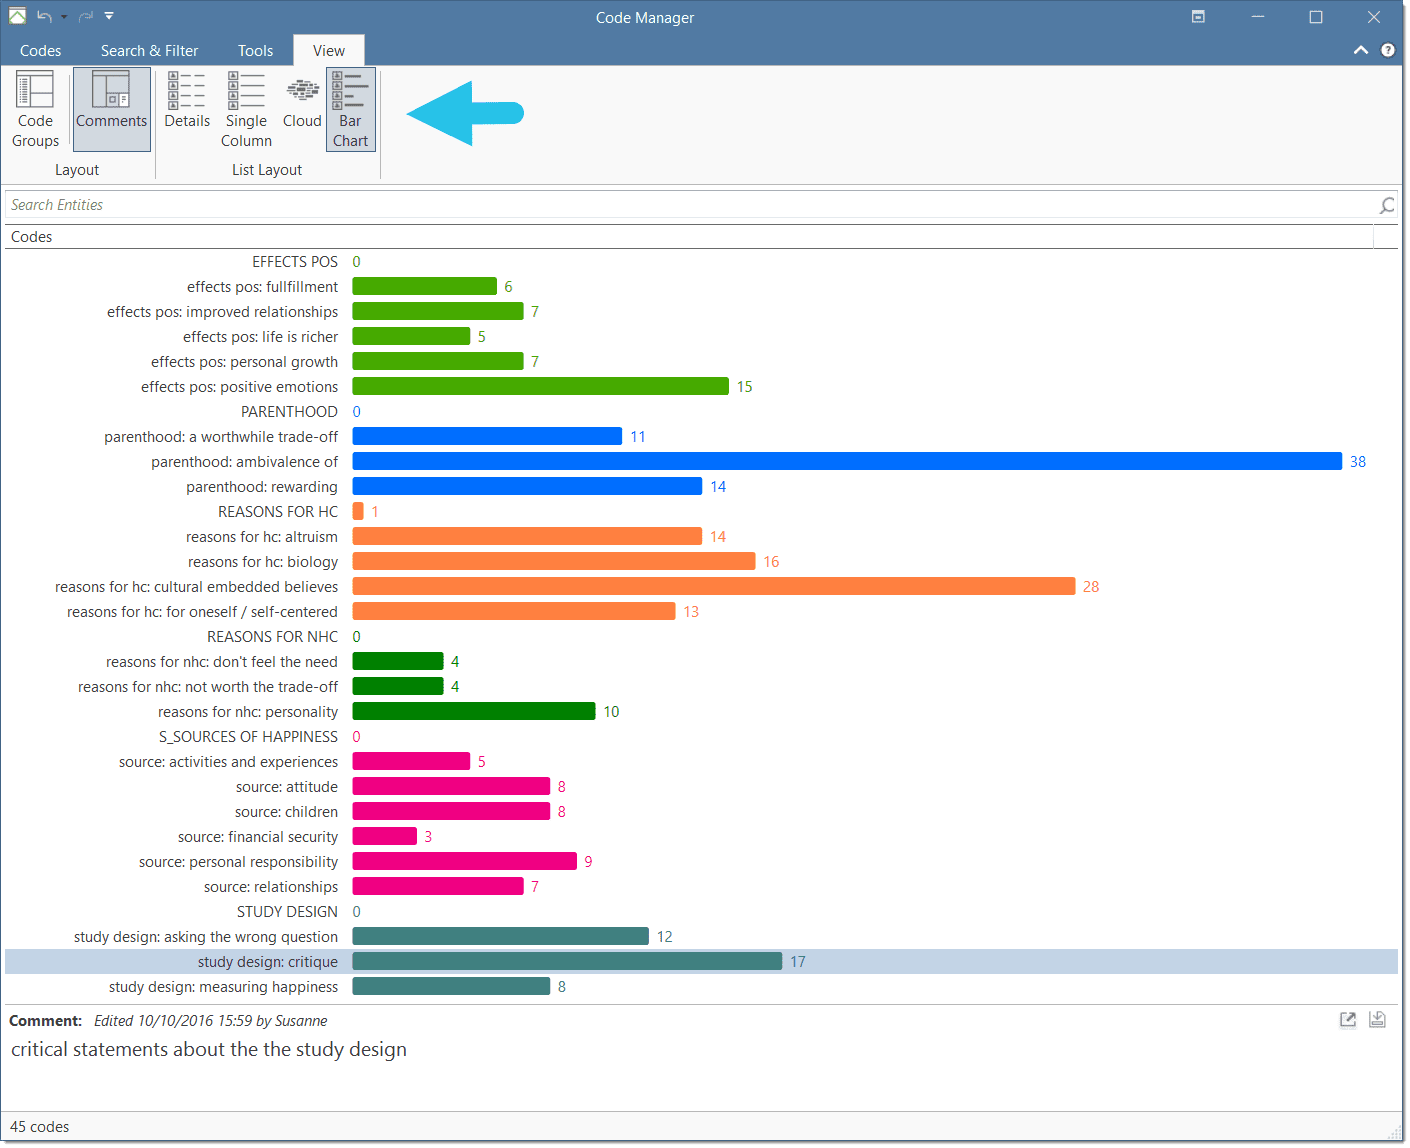 Code Manager Bar Chart View with code comments 